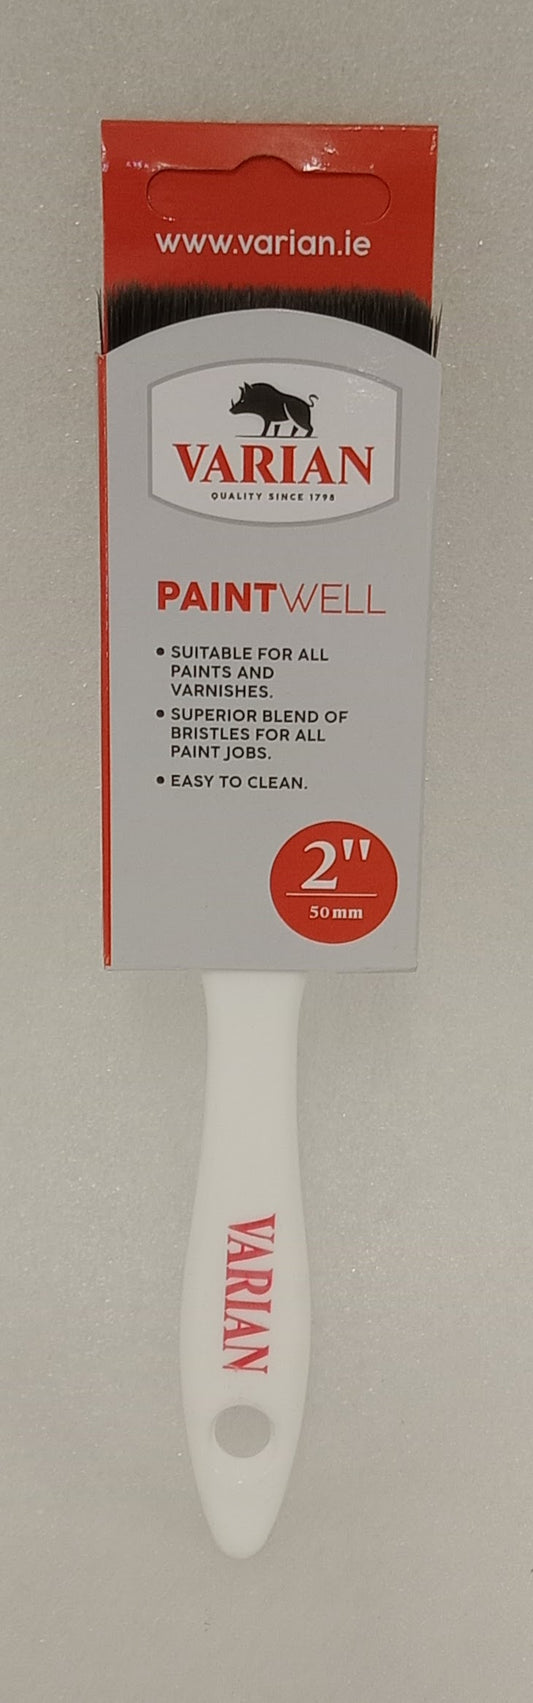 2IN PAINT WELL PAINT BRUSH